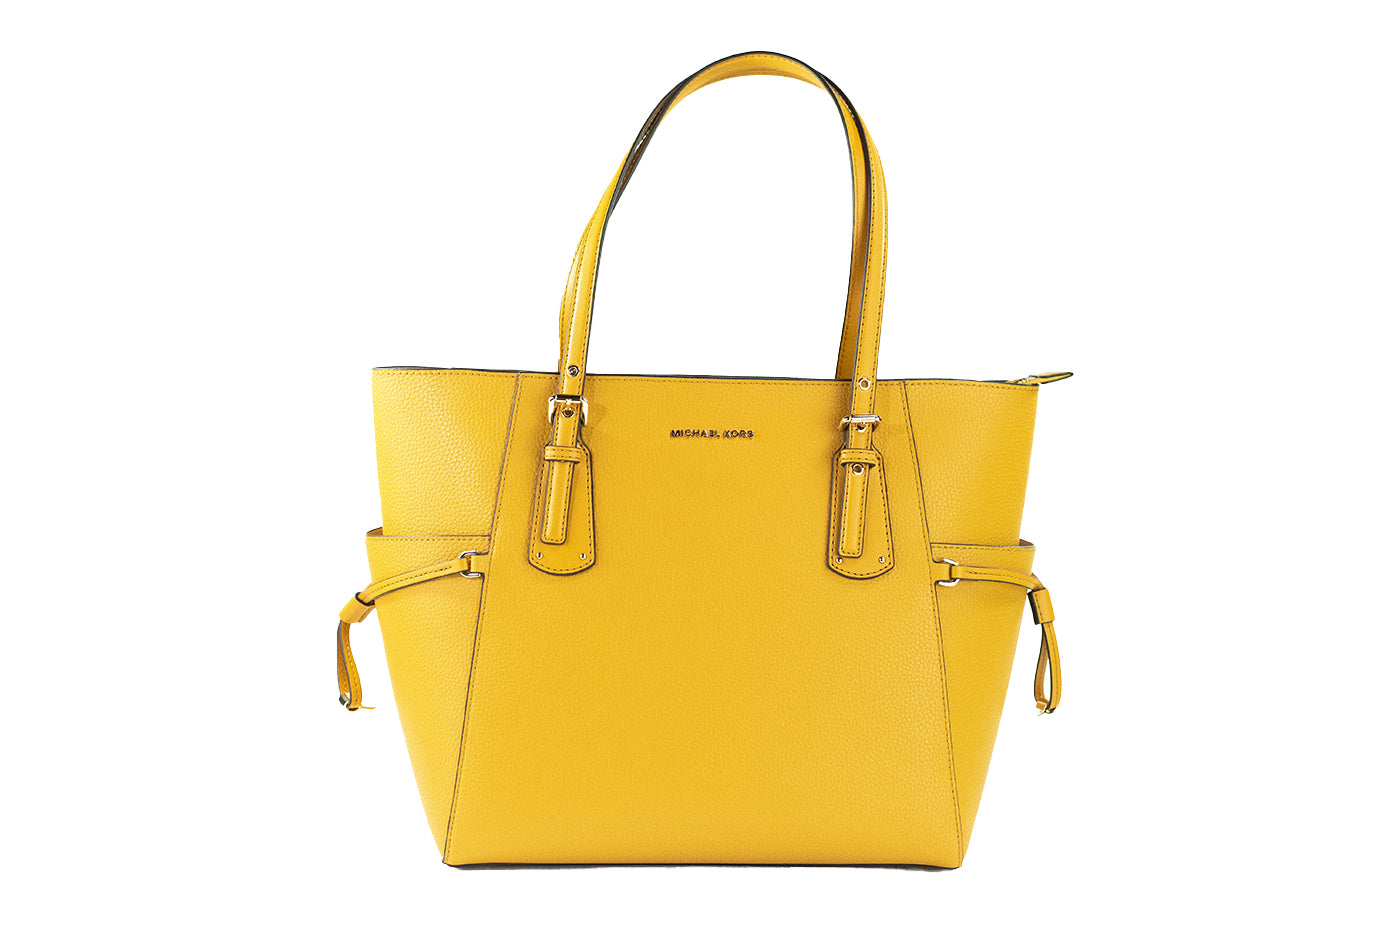 New Michael Kors Voyager Pebbled Leather Tote Bag Marigold